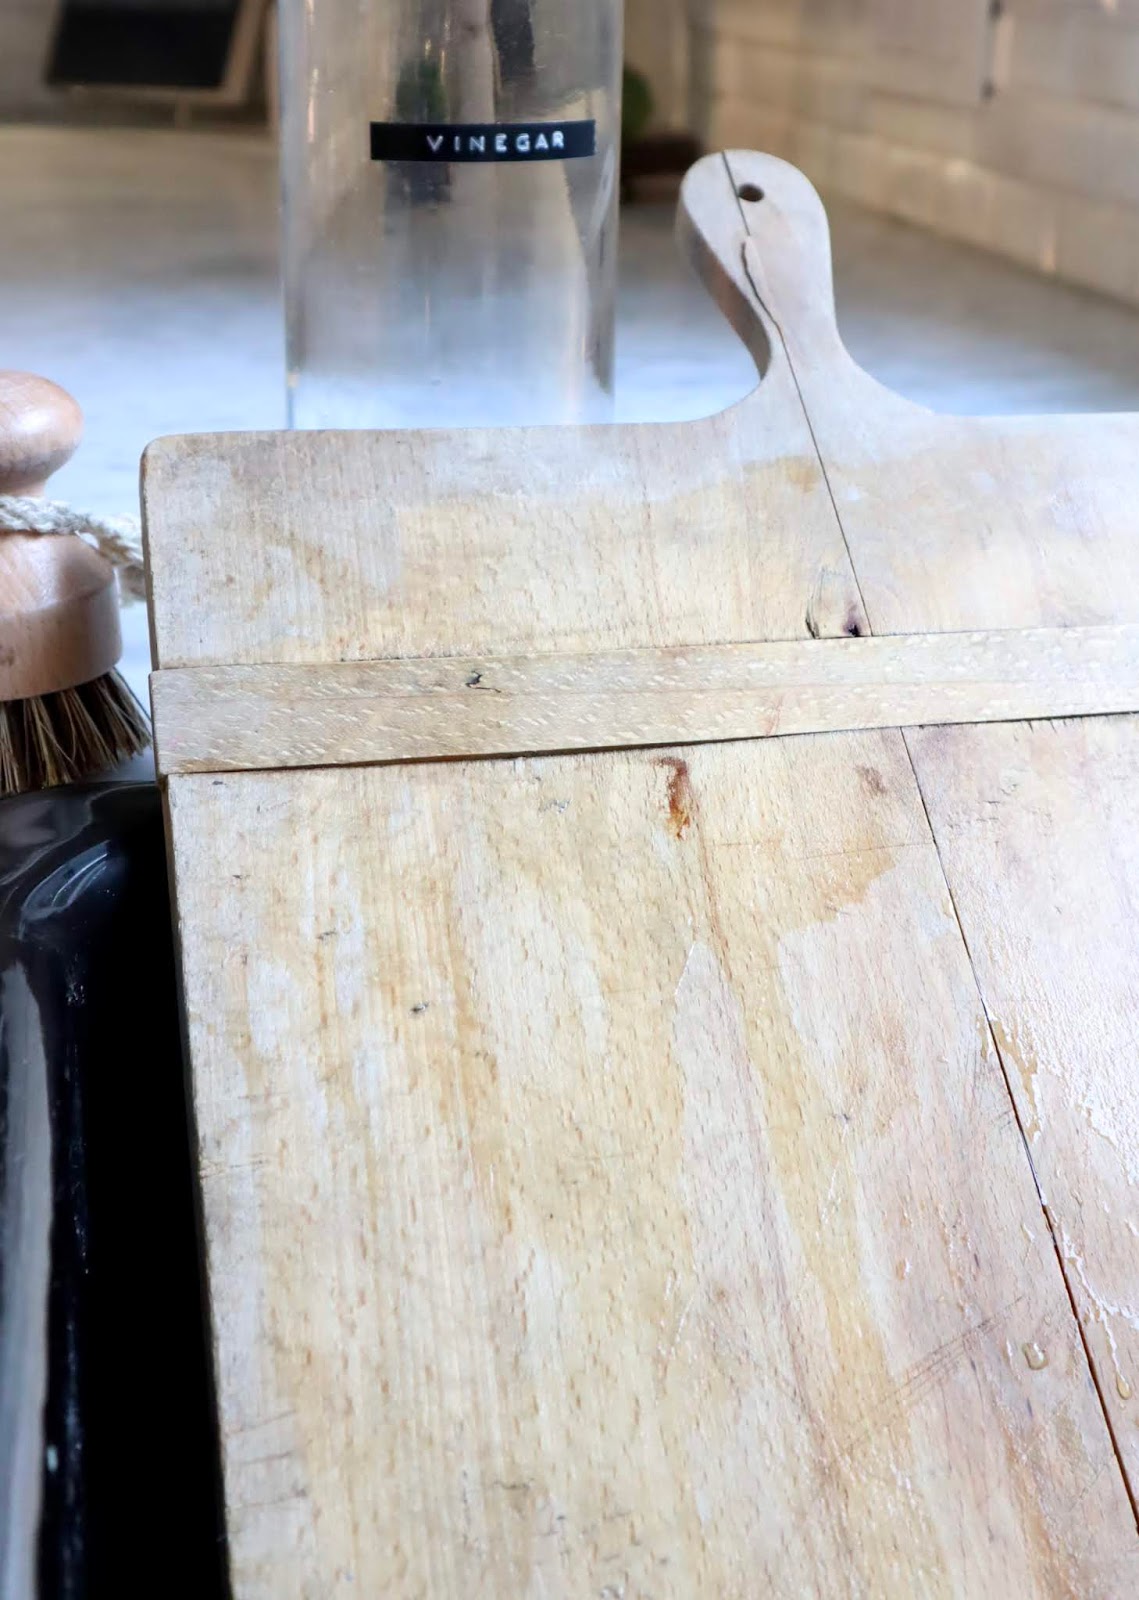 How to disinfect wood cutting boards